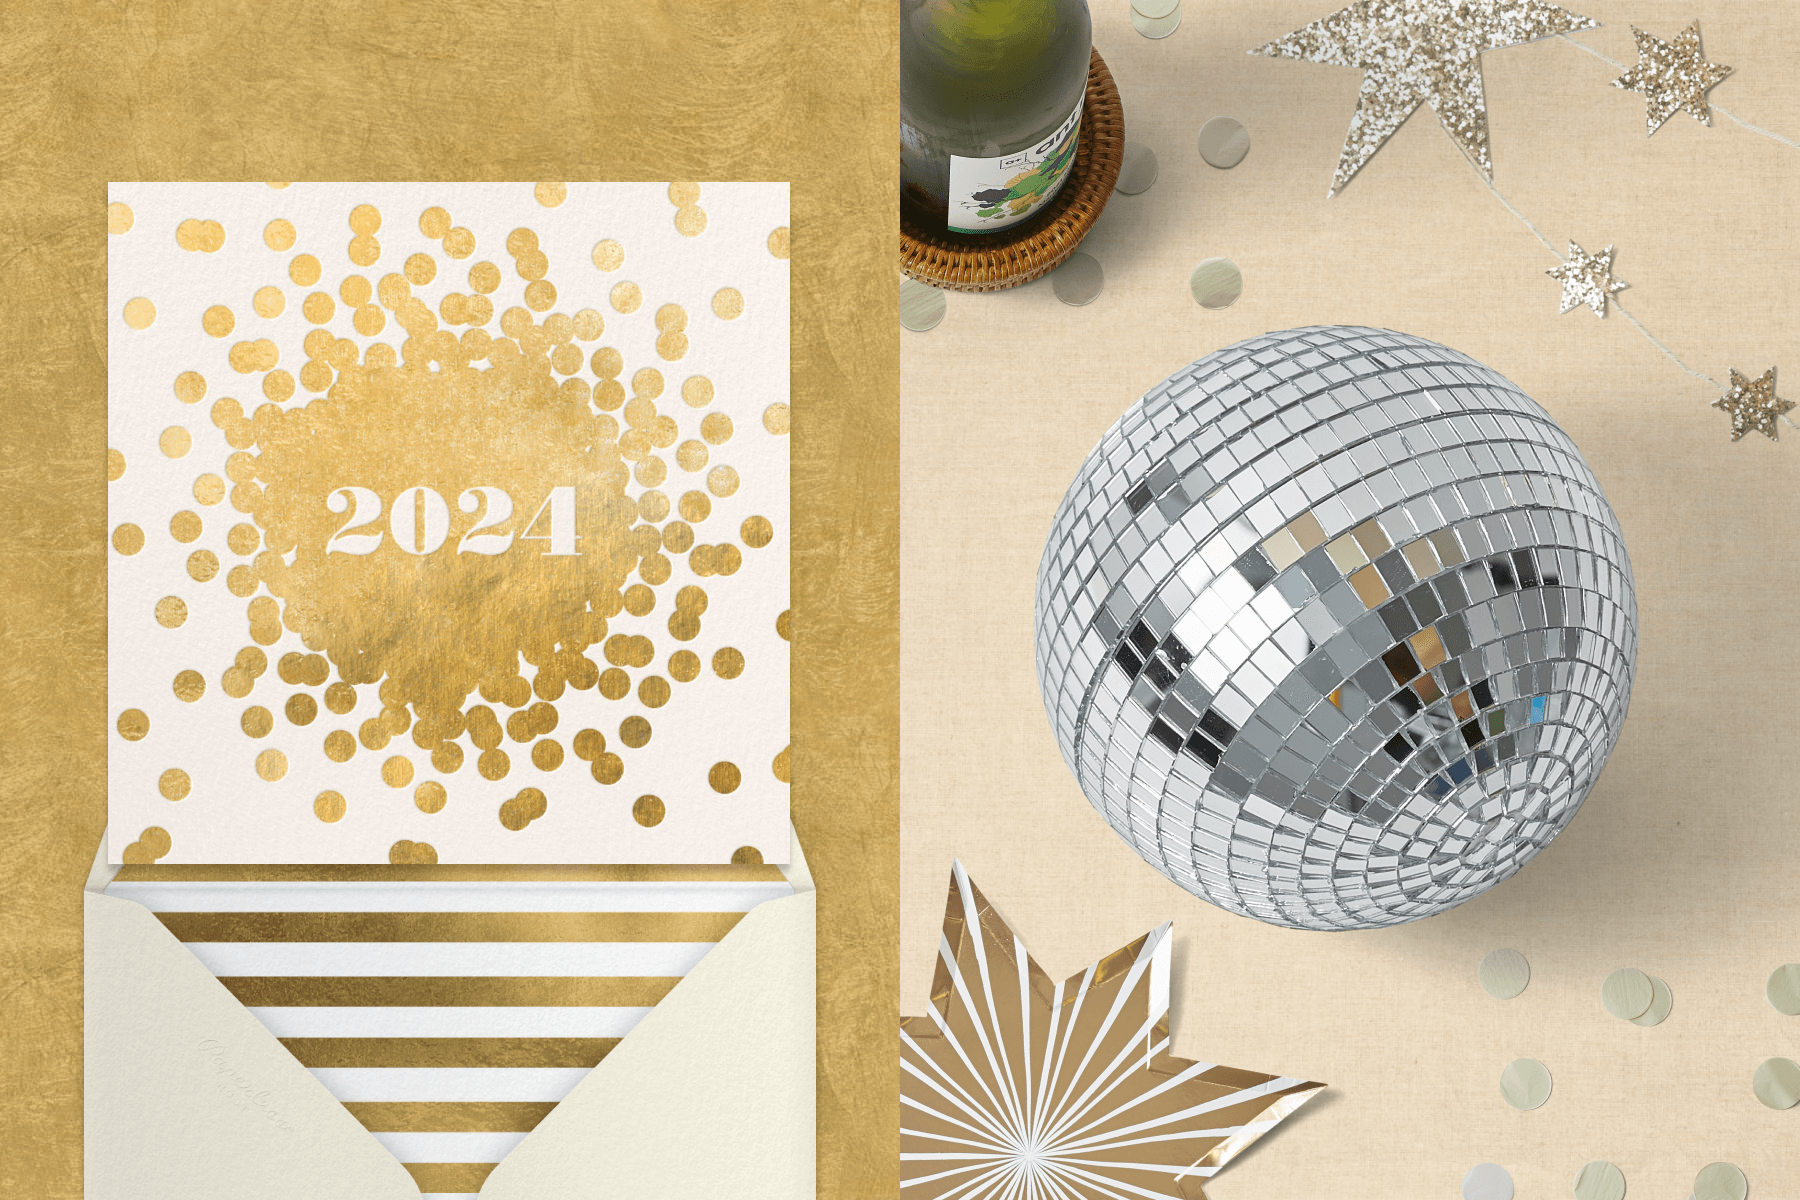 Left: A New Year's Eve invitation with gold confetti accents and "2024" in the middle; Right: Party supplies including a disco ball, a star-shaped plate and garland, and a bottle of wine.